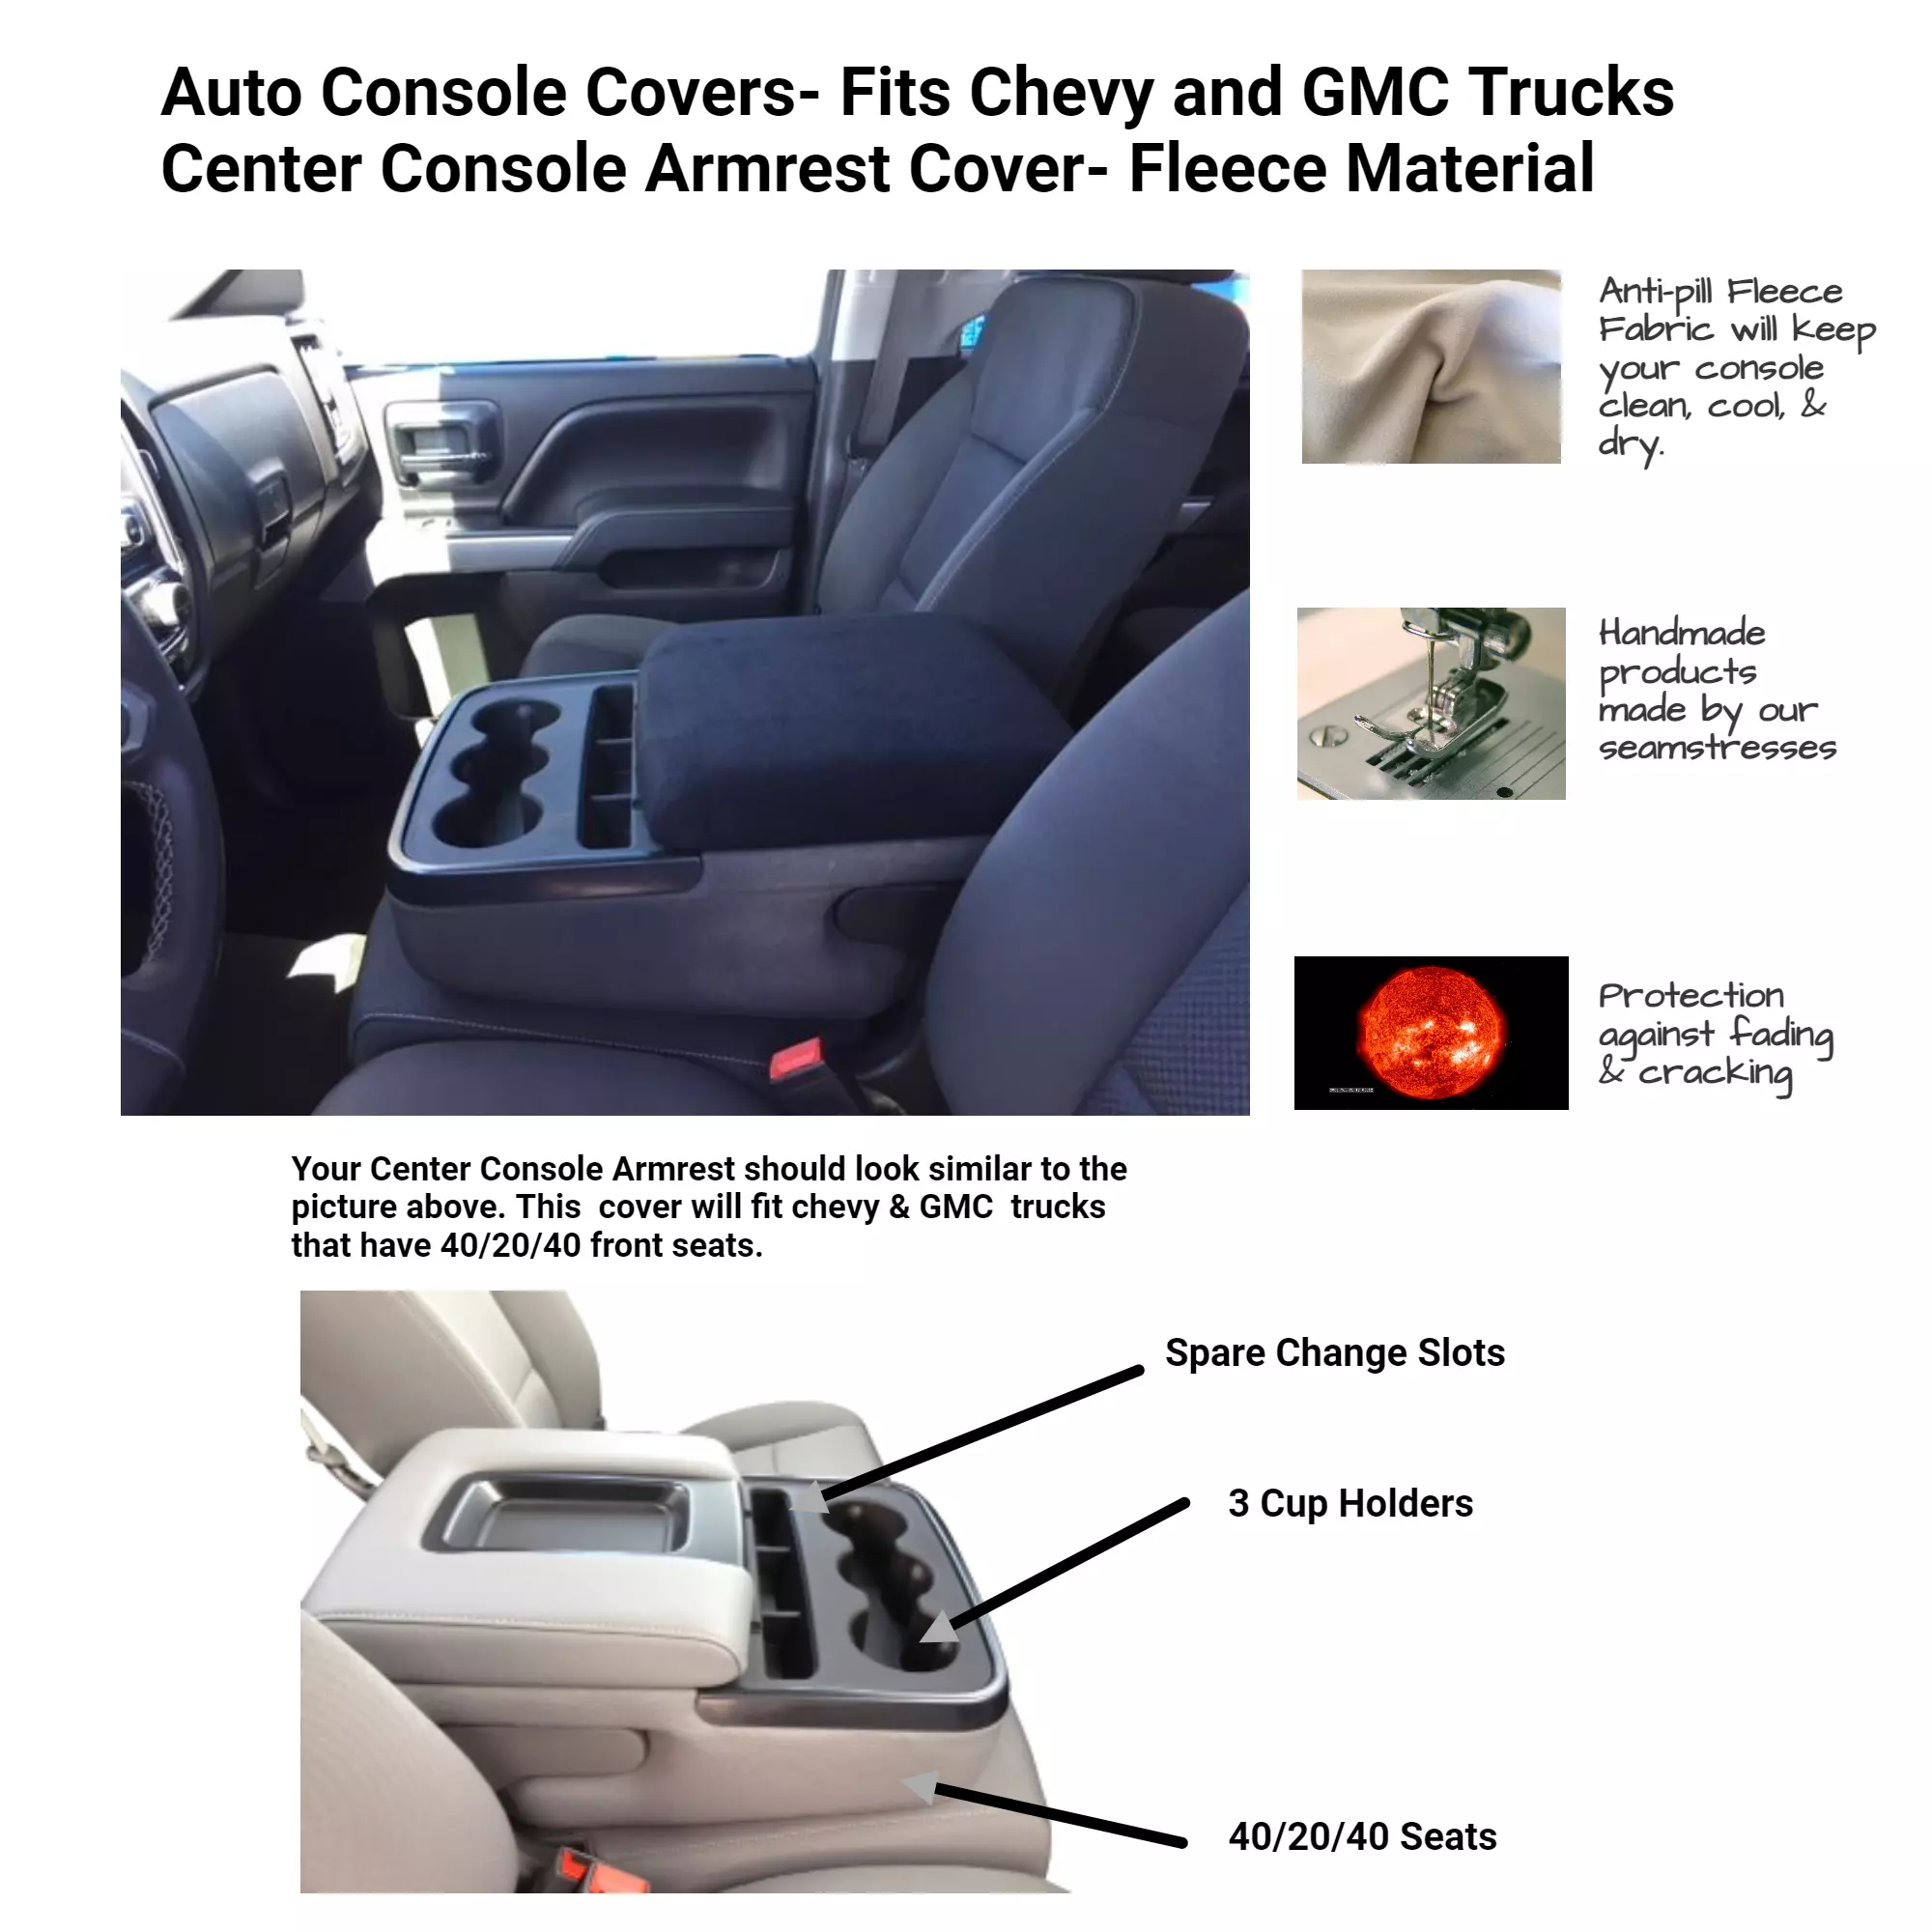 Buy Center Console Armrest Cover Fits the Chevy Silverado 3500HD -All Models & Trims with 40/20/40 front seats 2014-2019-Neoprene Material​